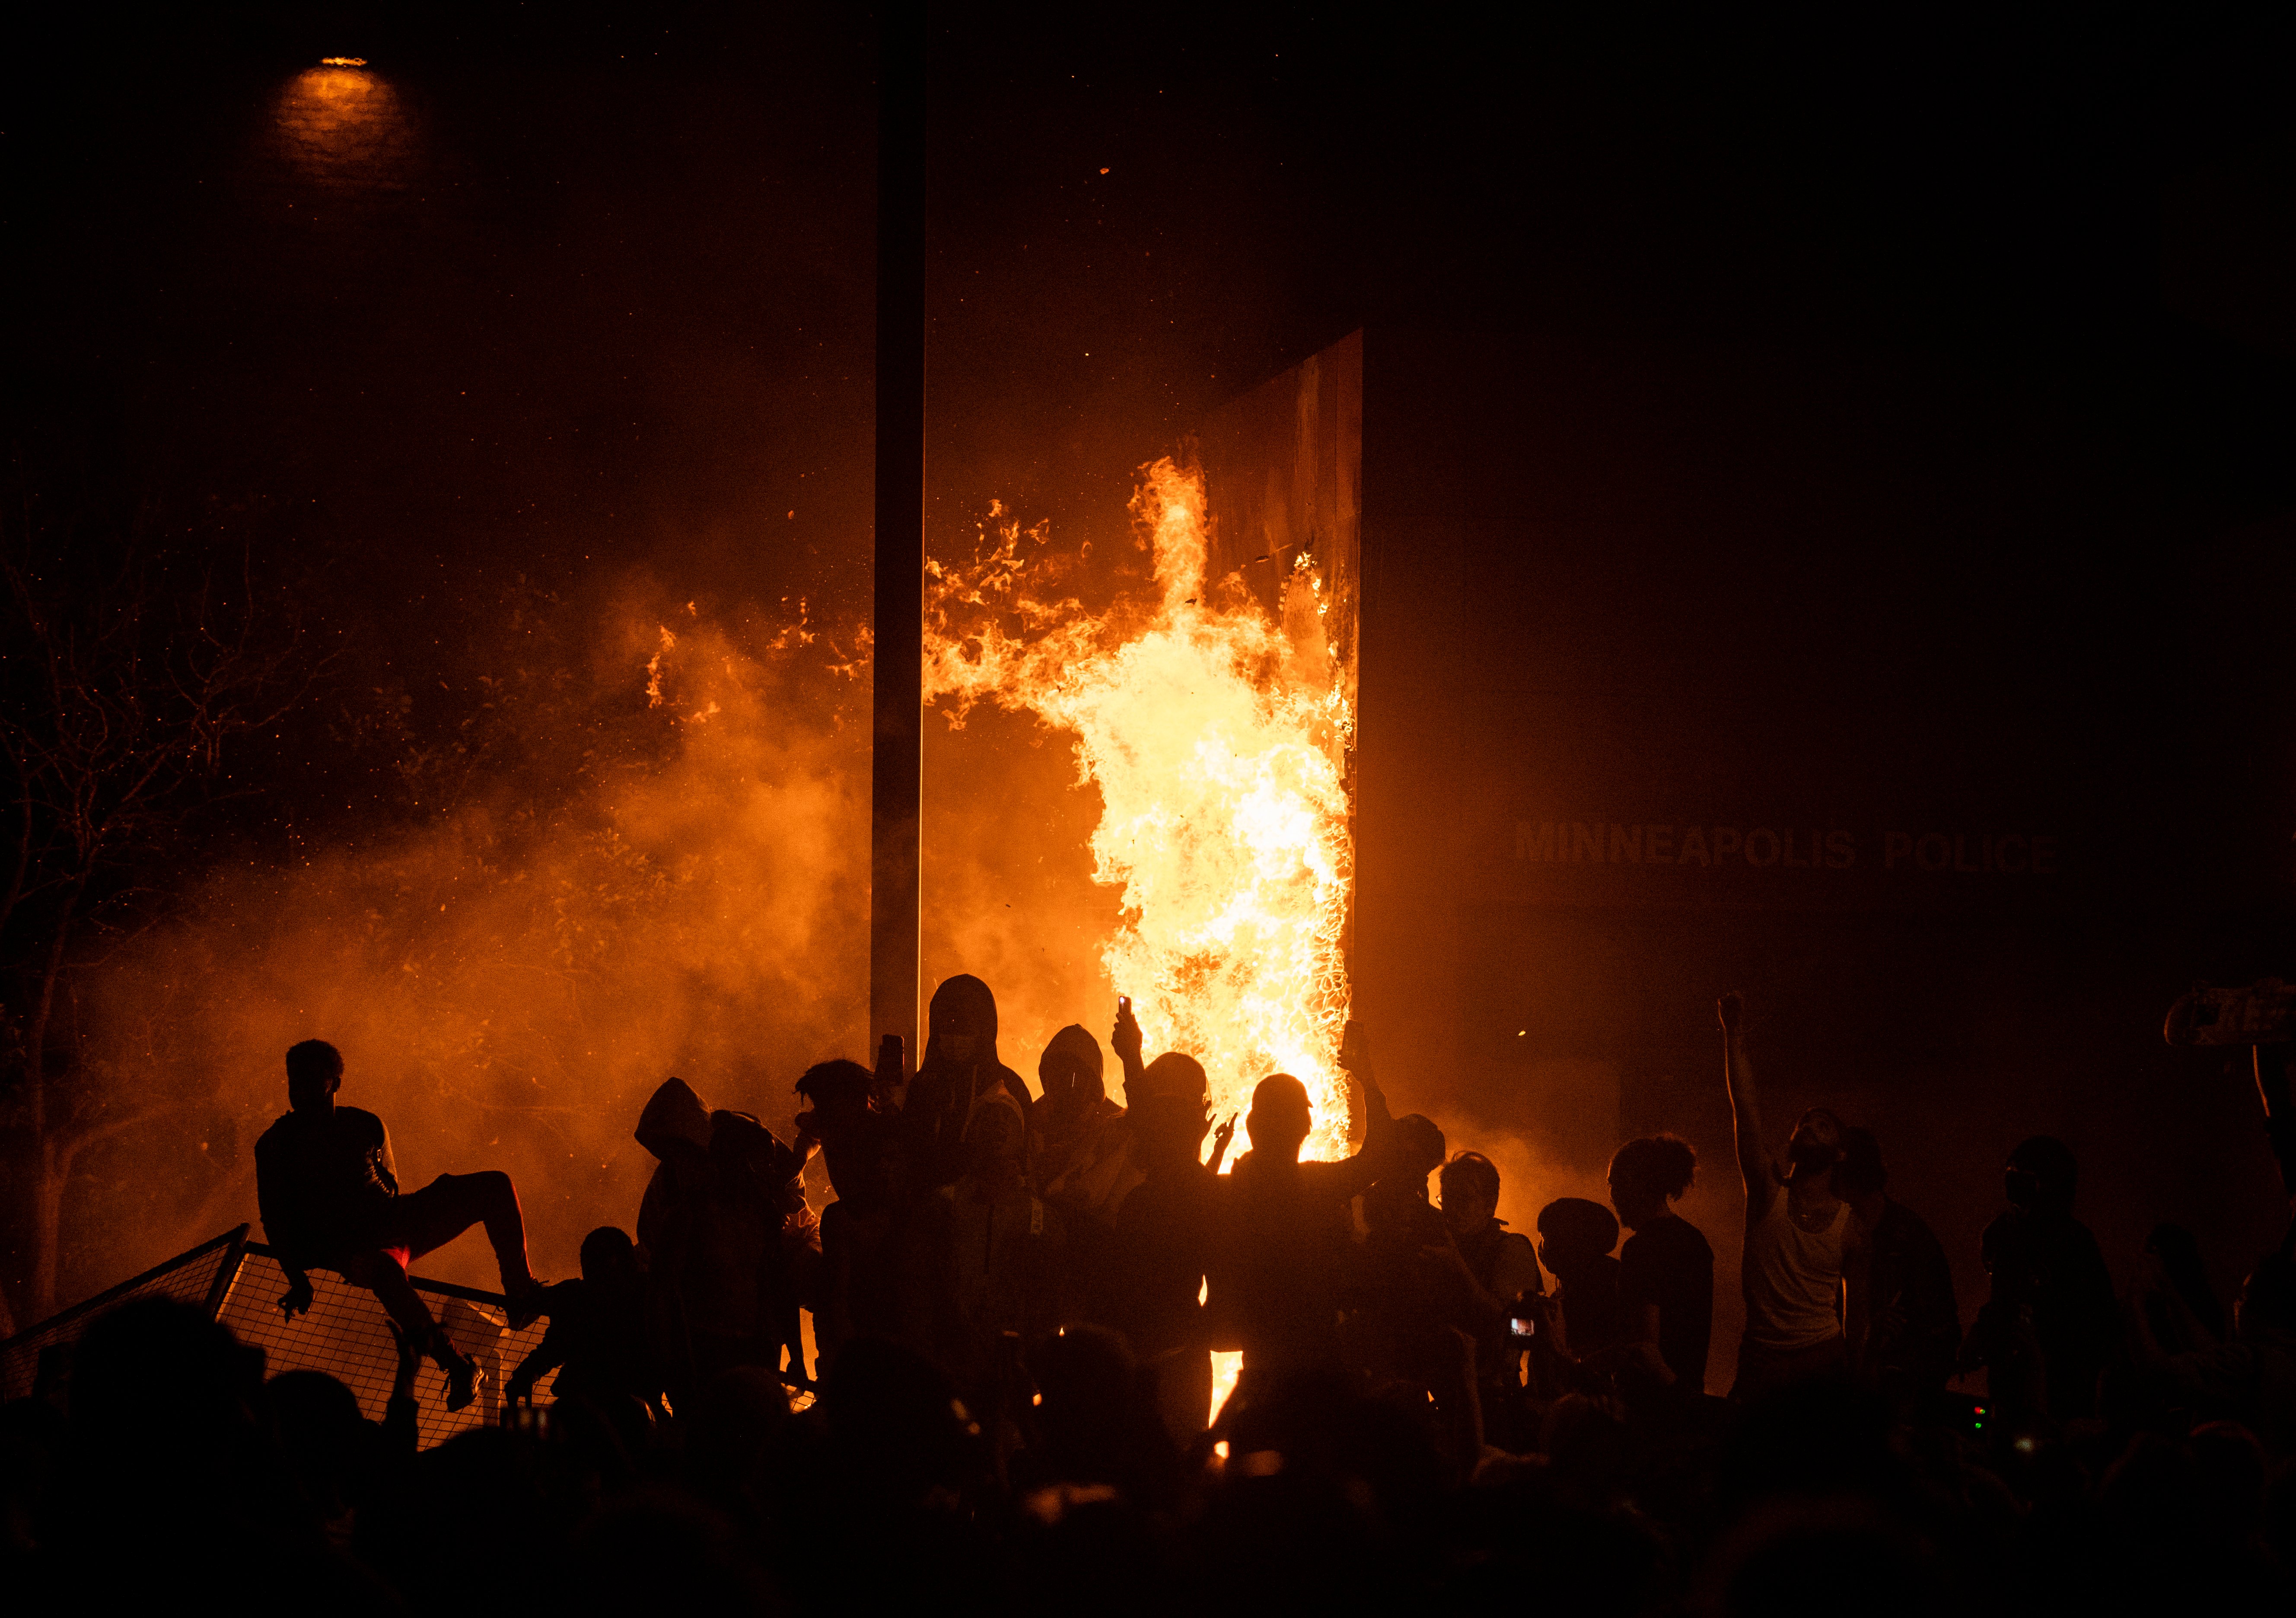 MINNEAPOLIS, MN - MAY 28: Protesters cheer as the Third Police Precinct burns behind them on May 28, 2020 in Minneapolis, Minnesota. As unrest continues after the death of George Floyd police abandoned the precinct building, allowing protesters to set fire to it. (Photo by Stephen Maturen/Getty Images)